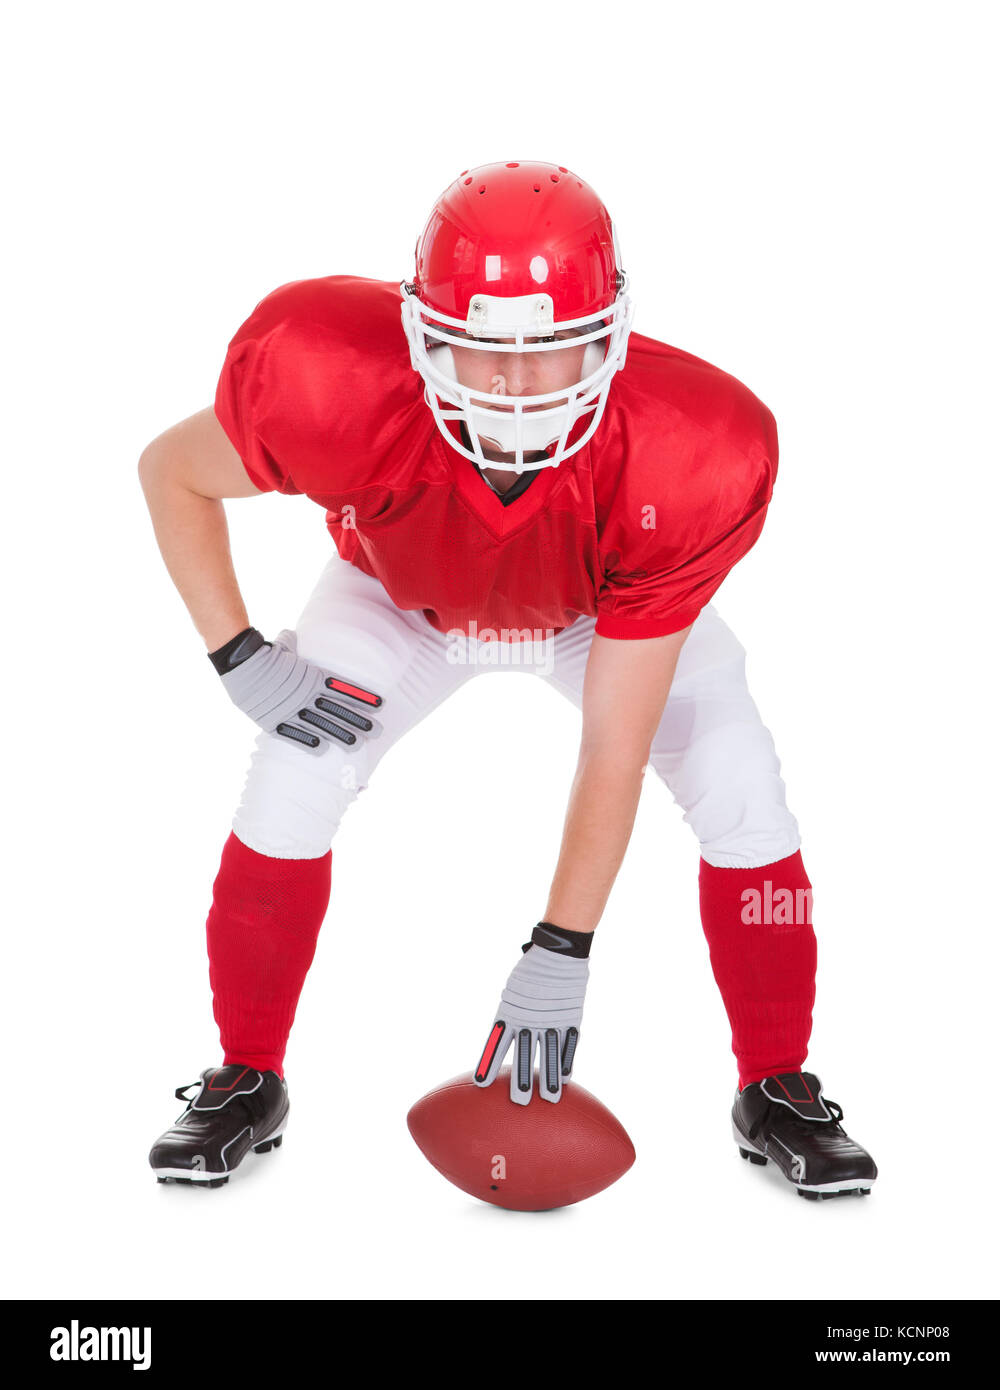 American Football Player With Rugby In Pose Over White Background Stock Photo